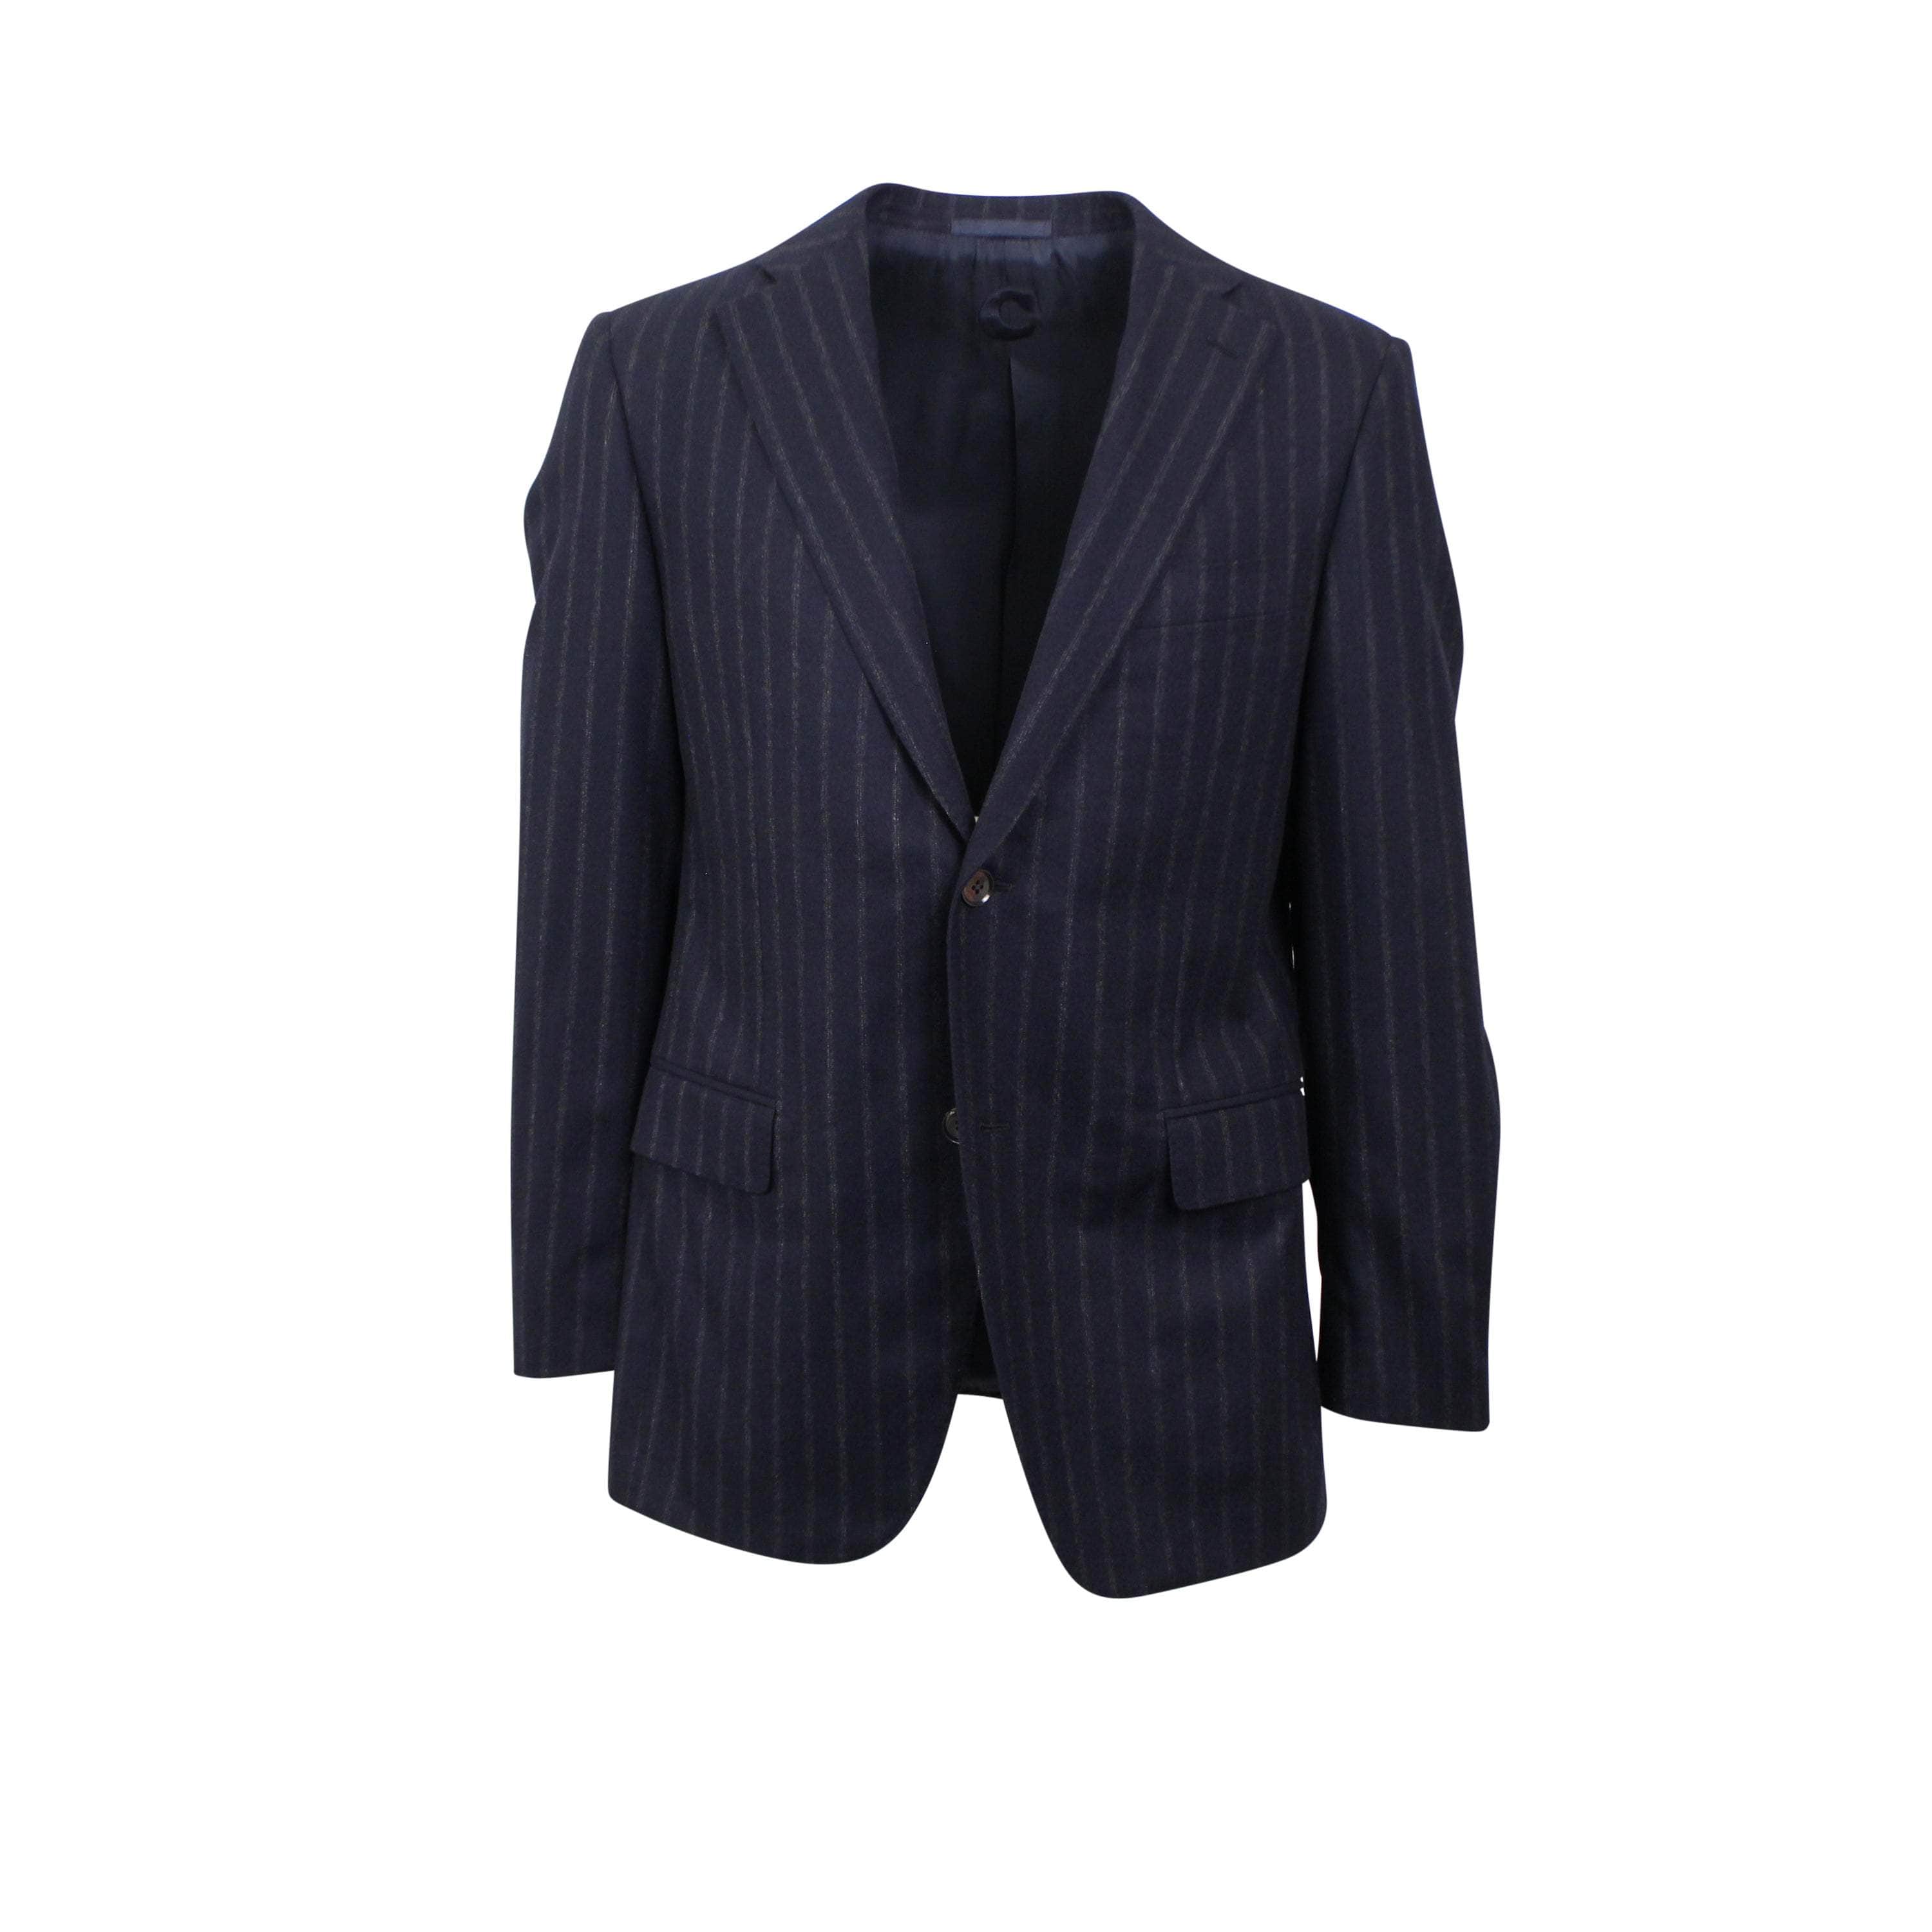 Caruso 500-750, caruso, channelenable-all, chicmi, couponcollection, main-clothing, shop375, size-50, Stadium Goods, stadiumgoods 50 Navy Blue Single Breasted Wool Plaid Suit 7R CRS-XTPS-0187/50 CRS-XTPS-0187/50